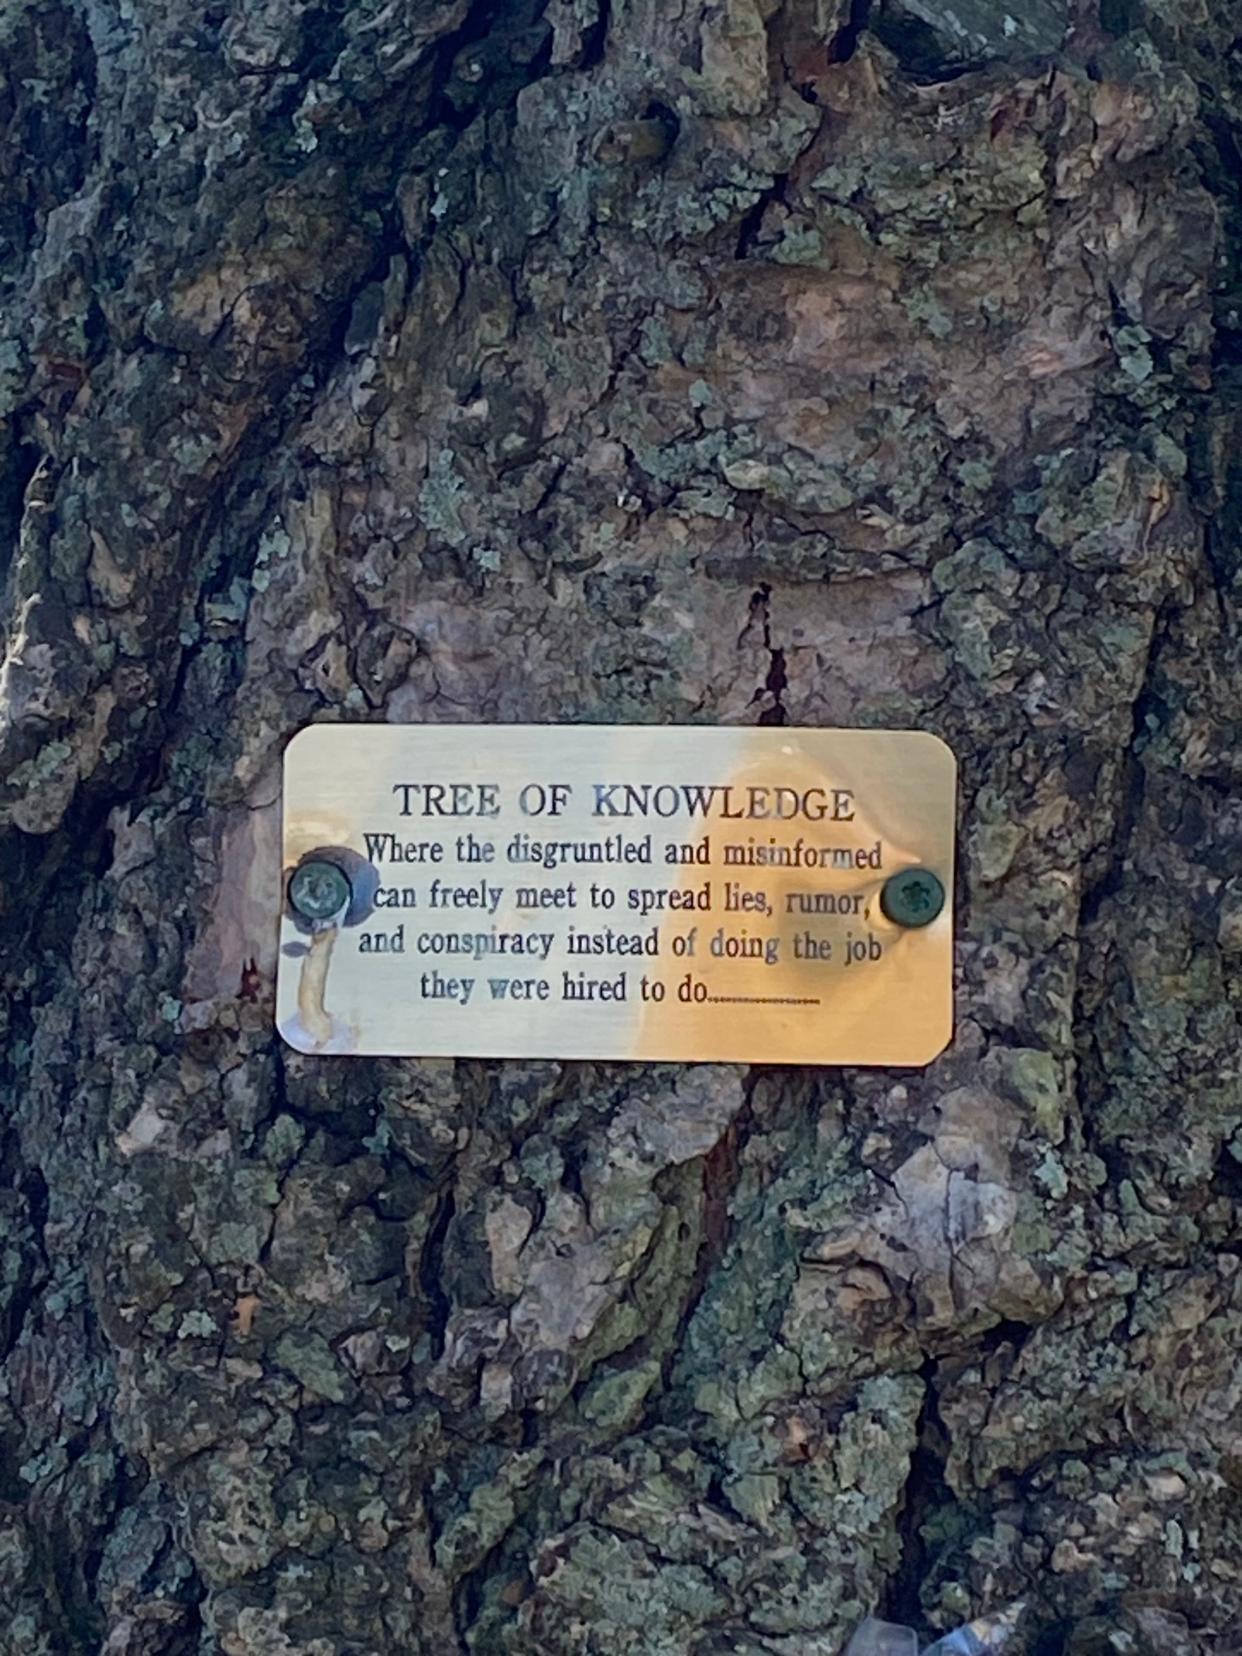 In August 2023, someone affixed a sign to the "Tree of Knowledge," located in the parking lot of the Asbury Park Police Department headquarters. The tree has been a location where African American police officers have met to discuss police and personal matters. The sign mocks the gathering spot as a place where "the disgruntled and misinformed can freely meet to spread lies, rumor and conspiracy."